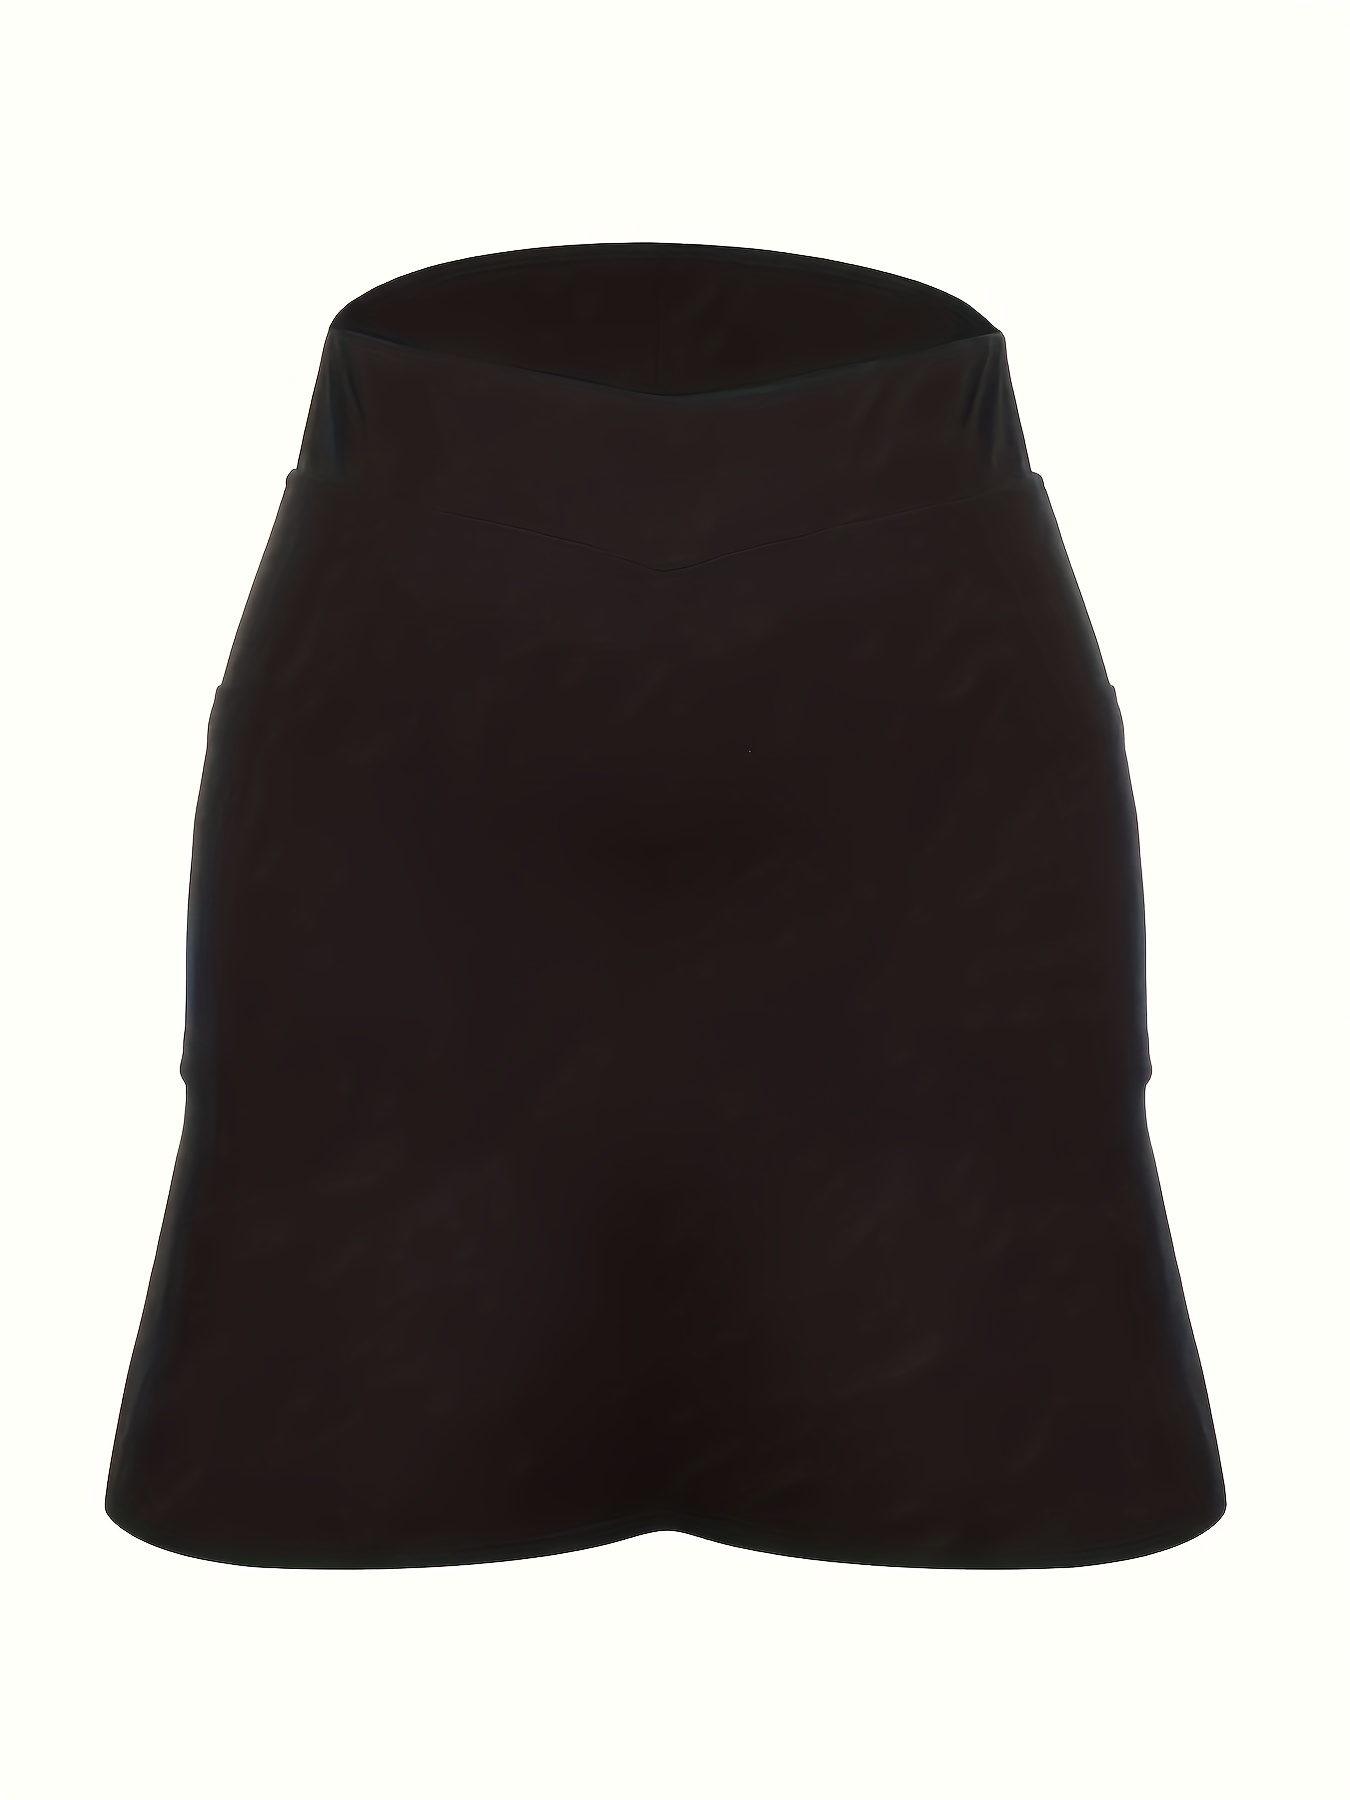 Golf Skirts for Women - Many Colors and Sizes